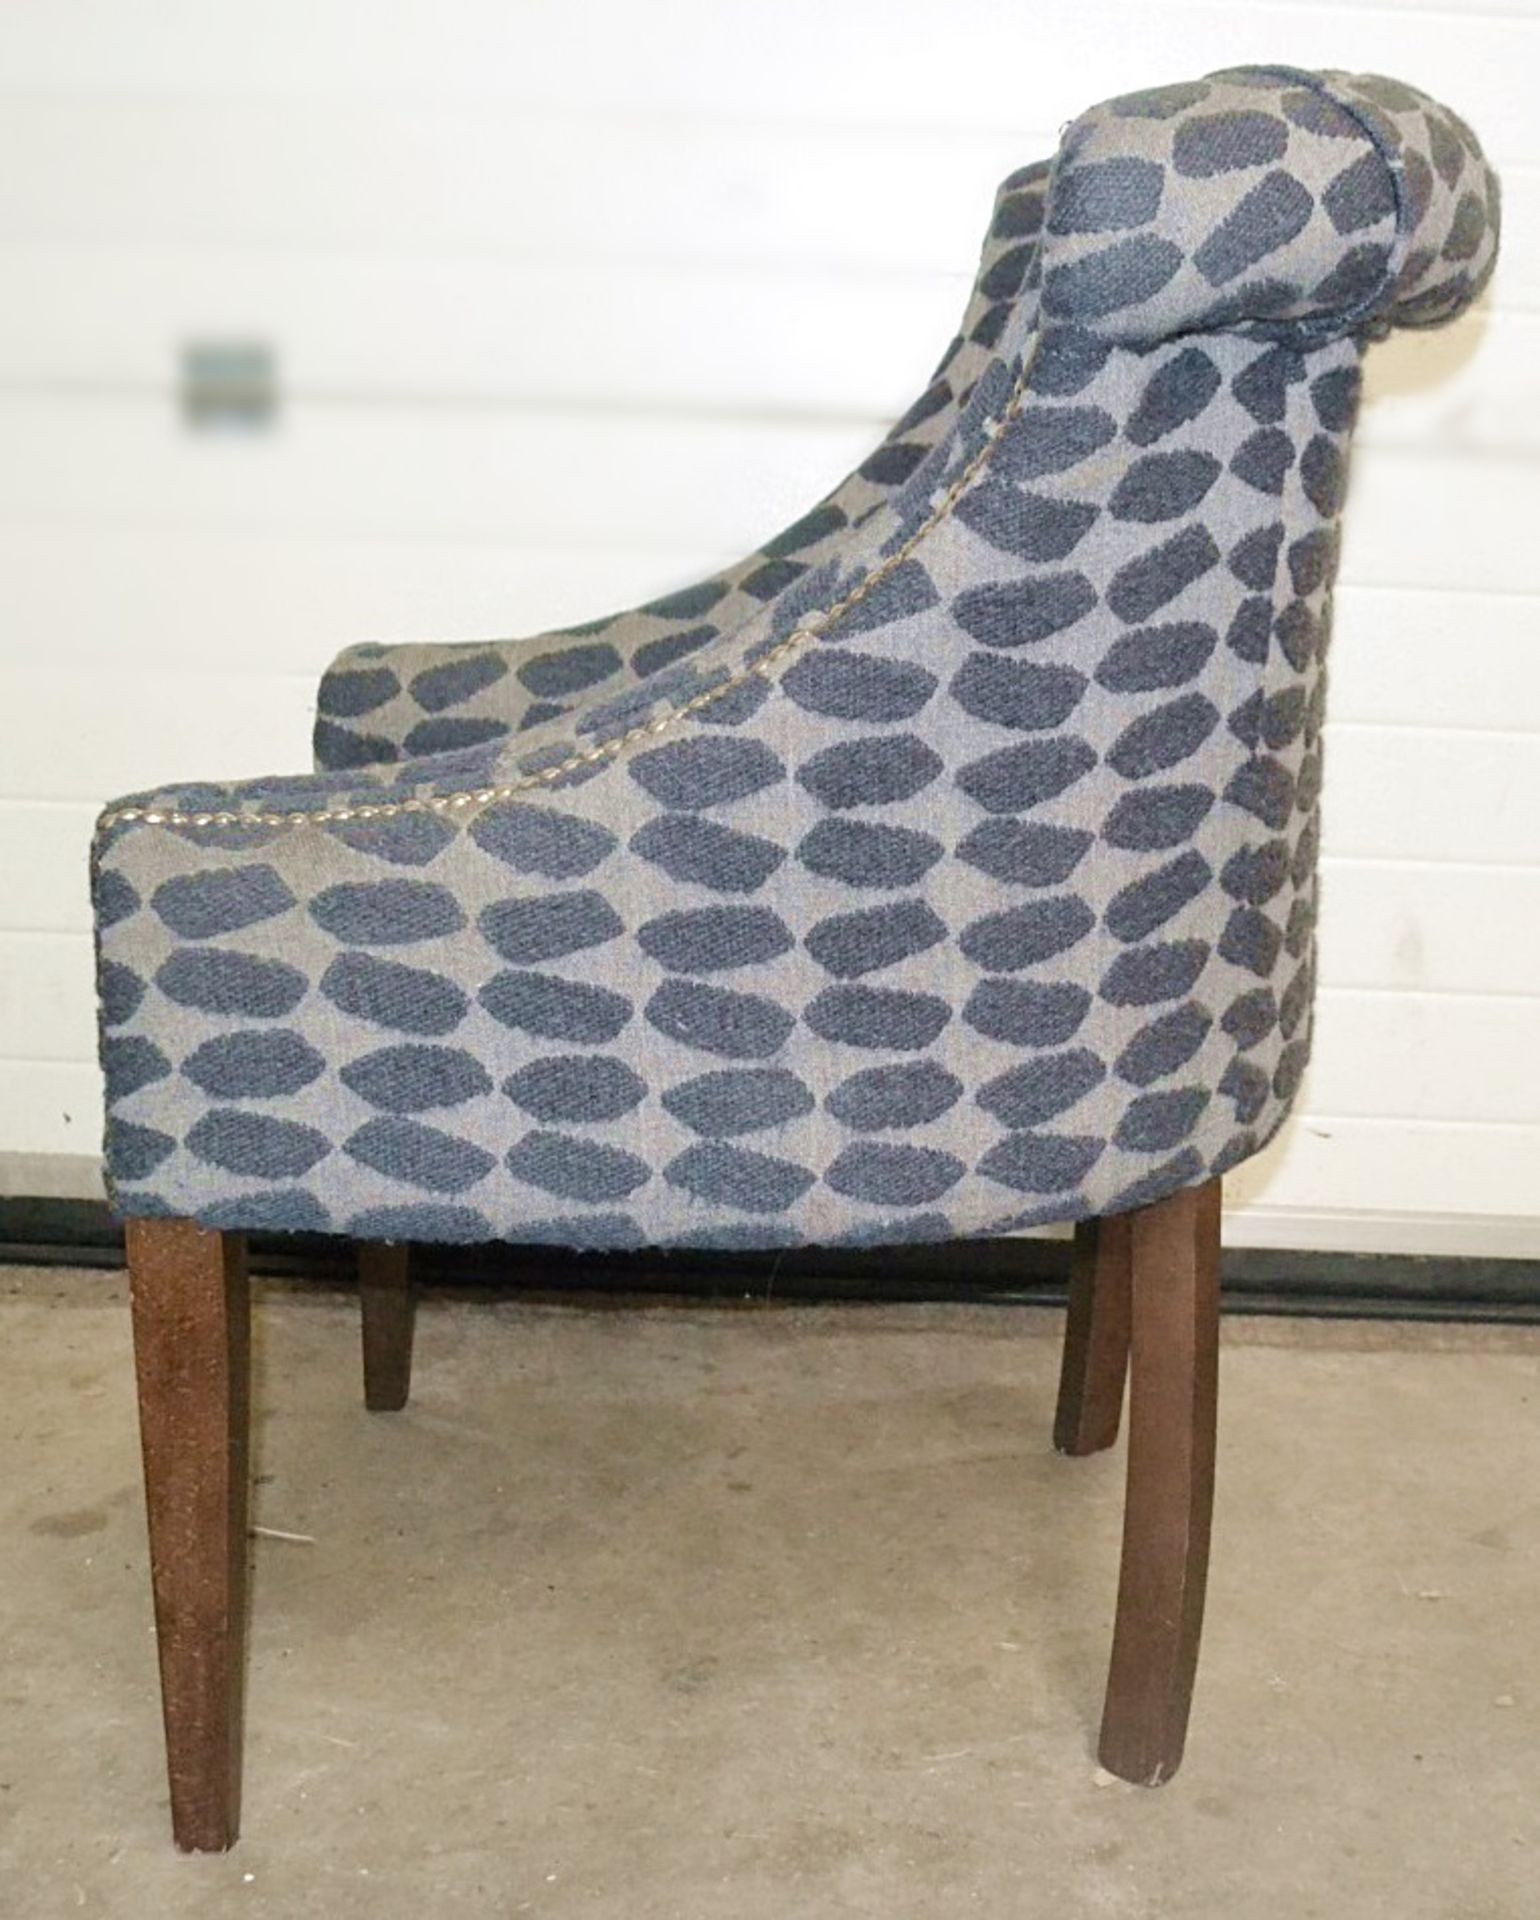 3 x Blue & Grey Upholstered Bar Chairs For Commercial Use - Dimensions (cm): W70 x D60, Back - Image 4 of 7